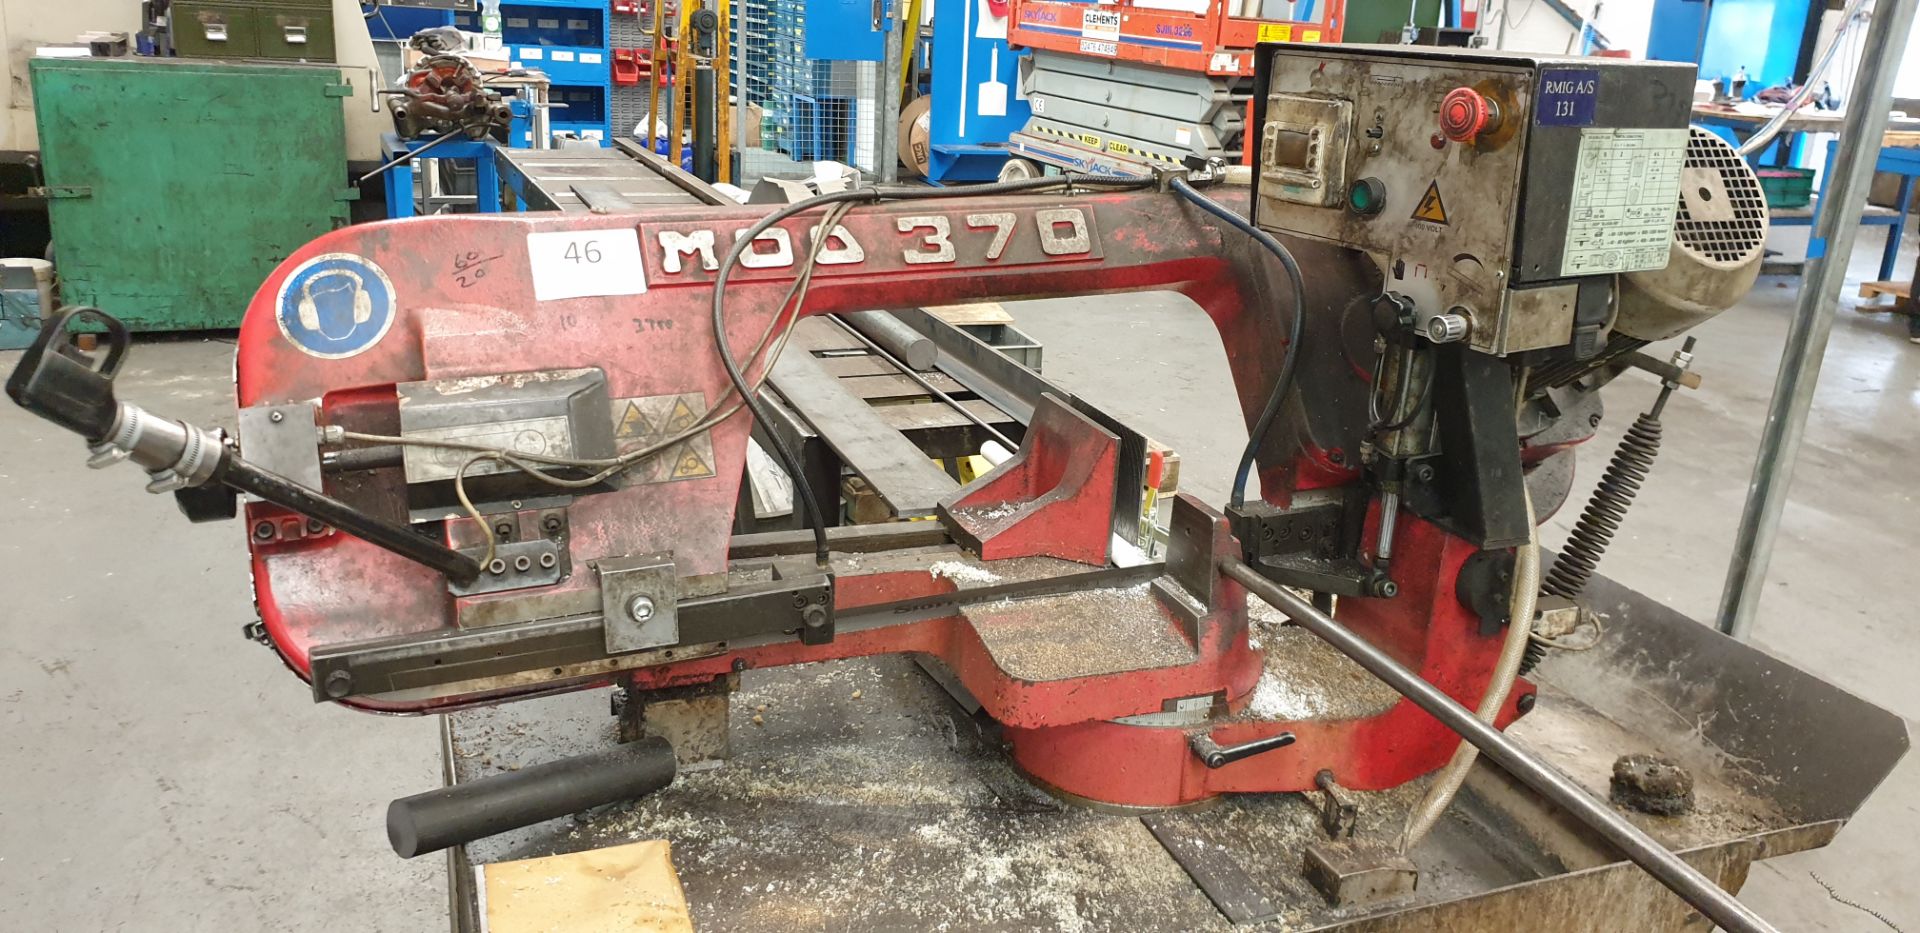 Bianco MOD 370, Hinge Type Horizontal Band Saw, Capacity Approx. 300mm Round , Serial Number: 003300